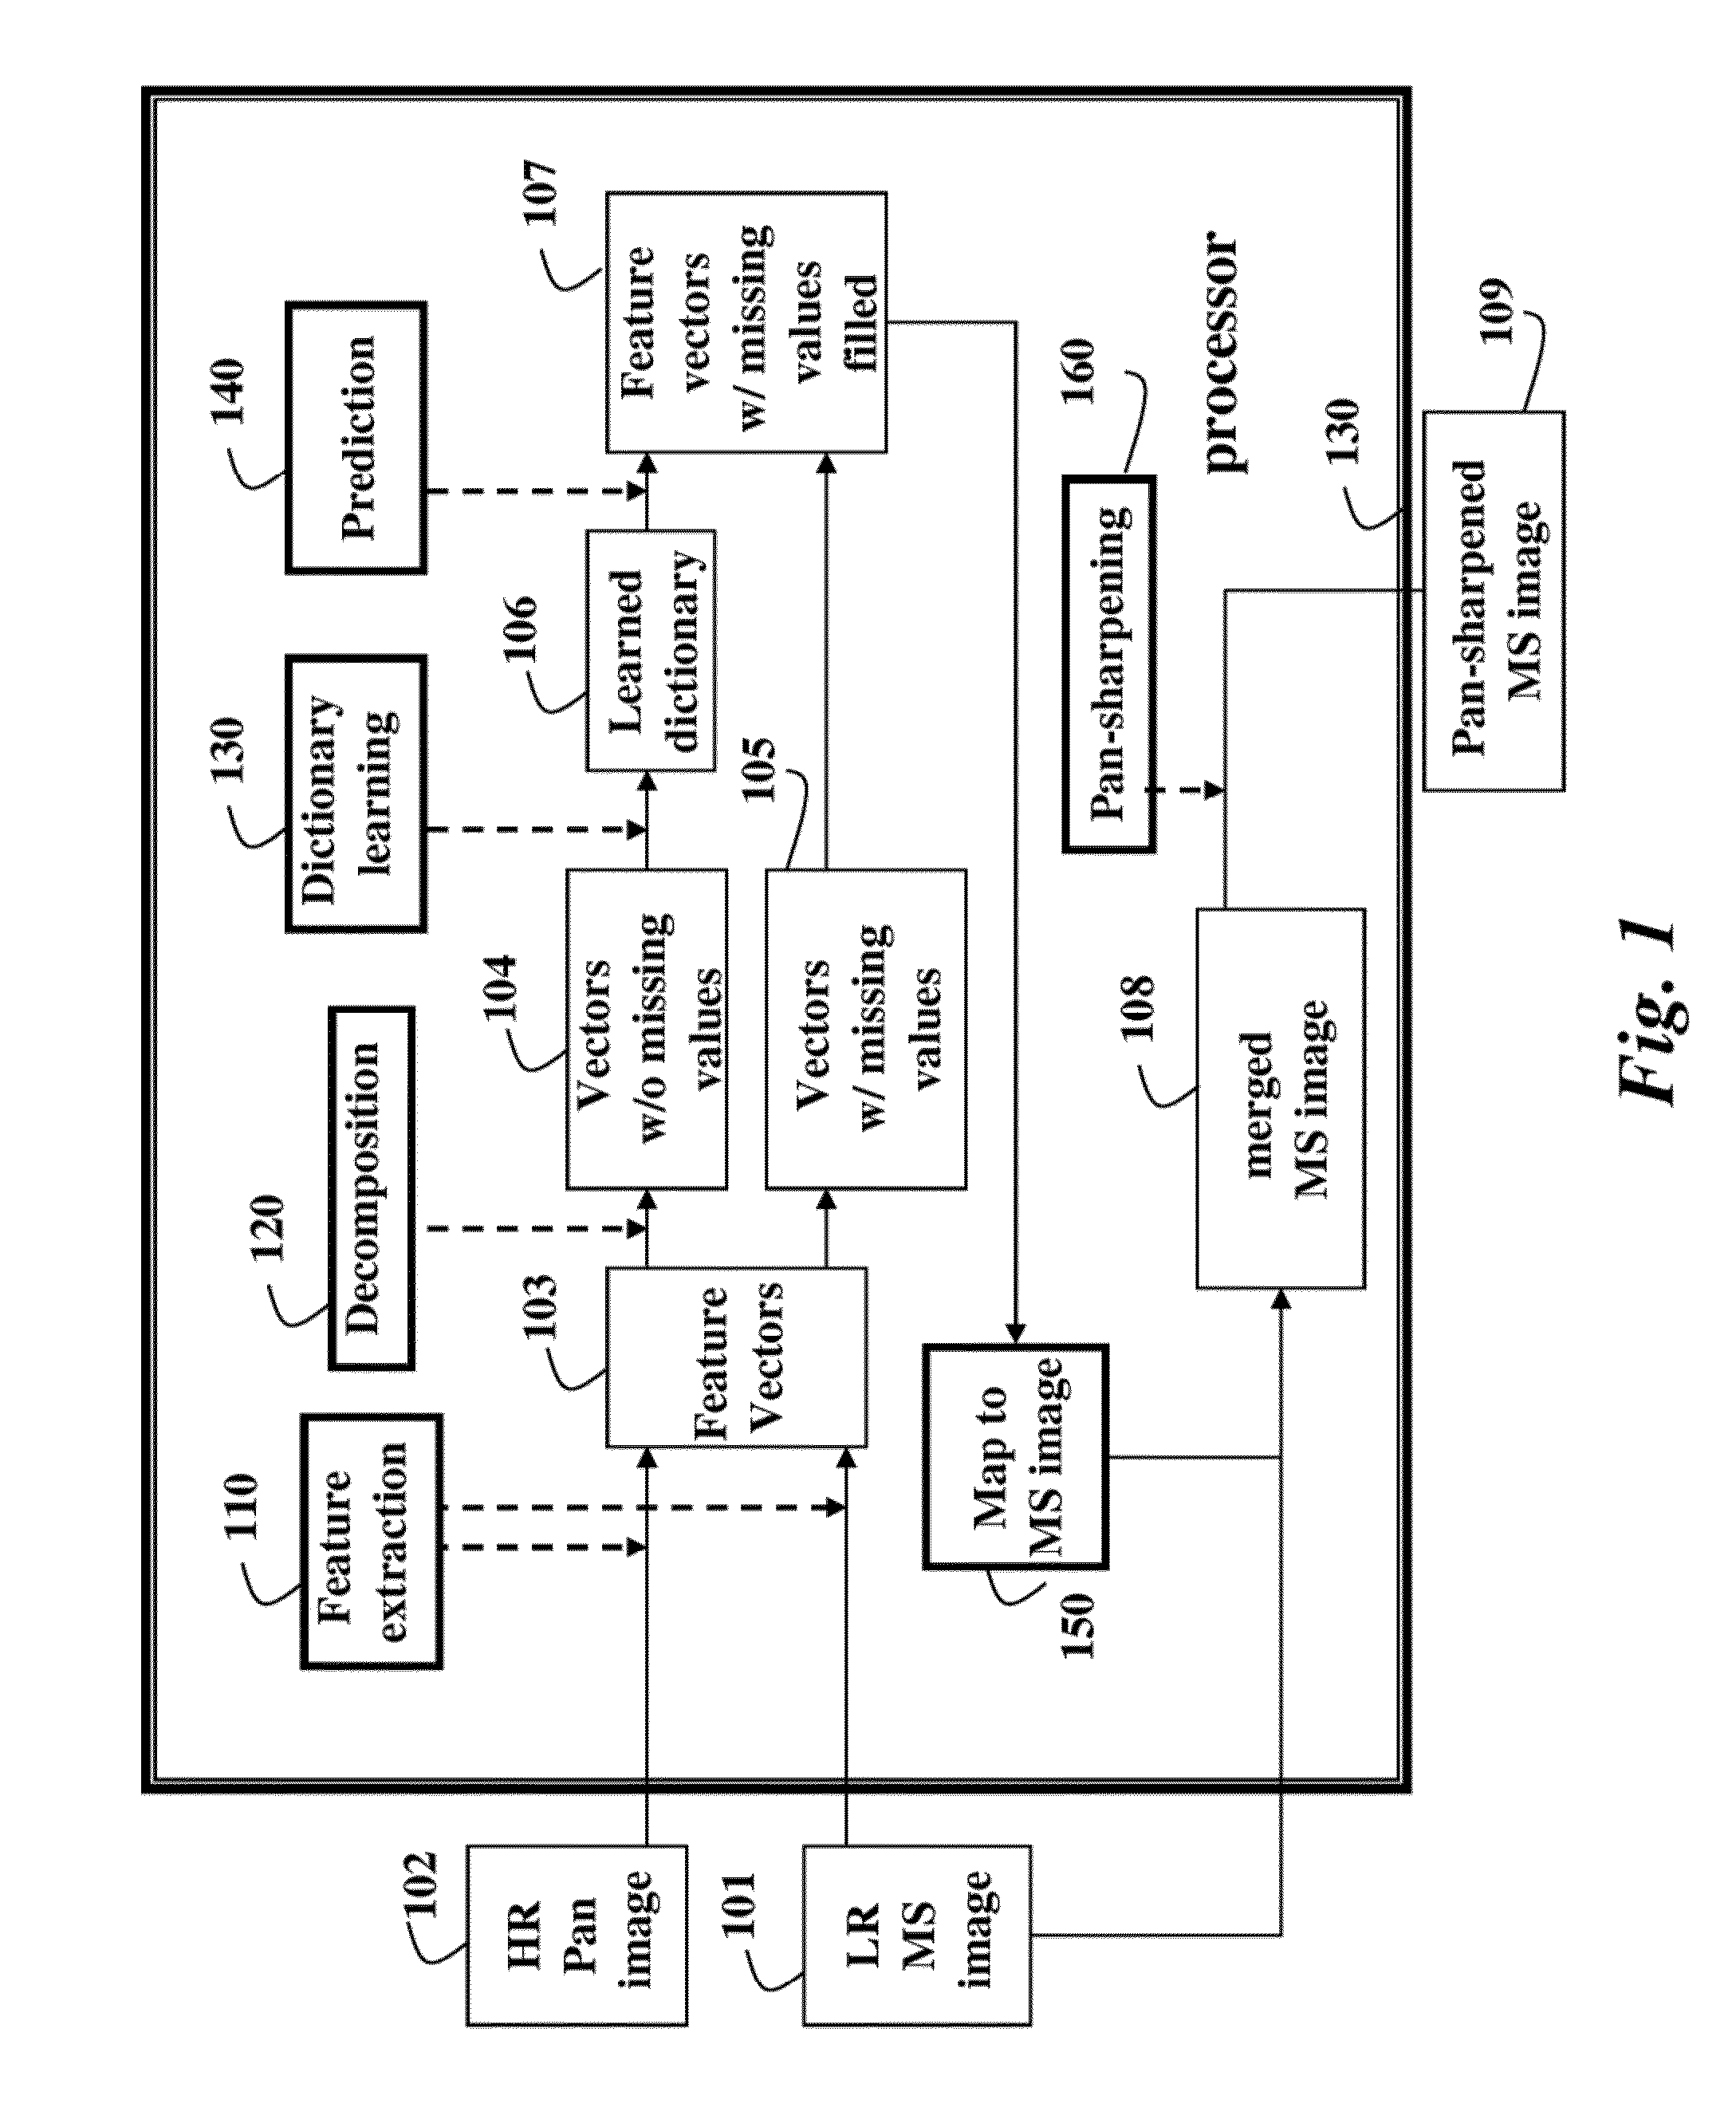 Method for Pan-Sharpening Panchromatic and Multispectral Images Using Dictionaries